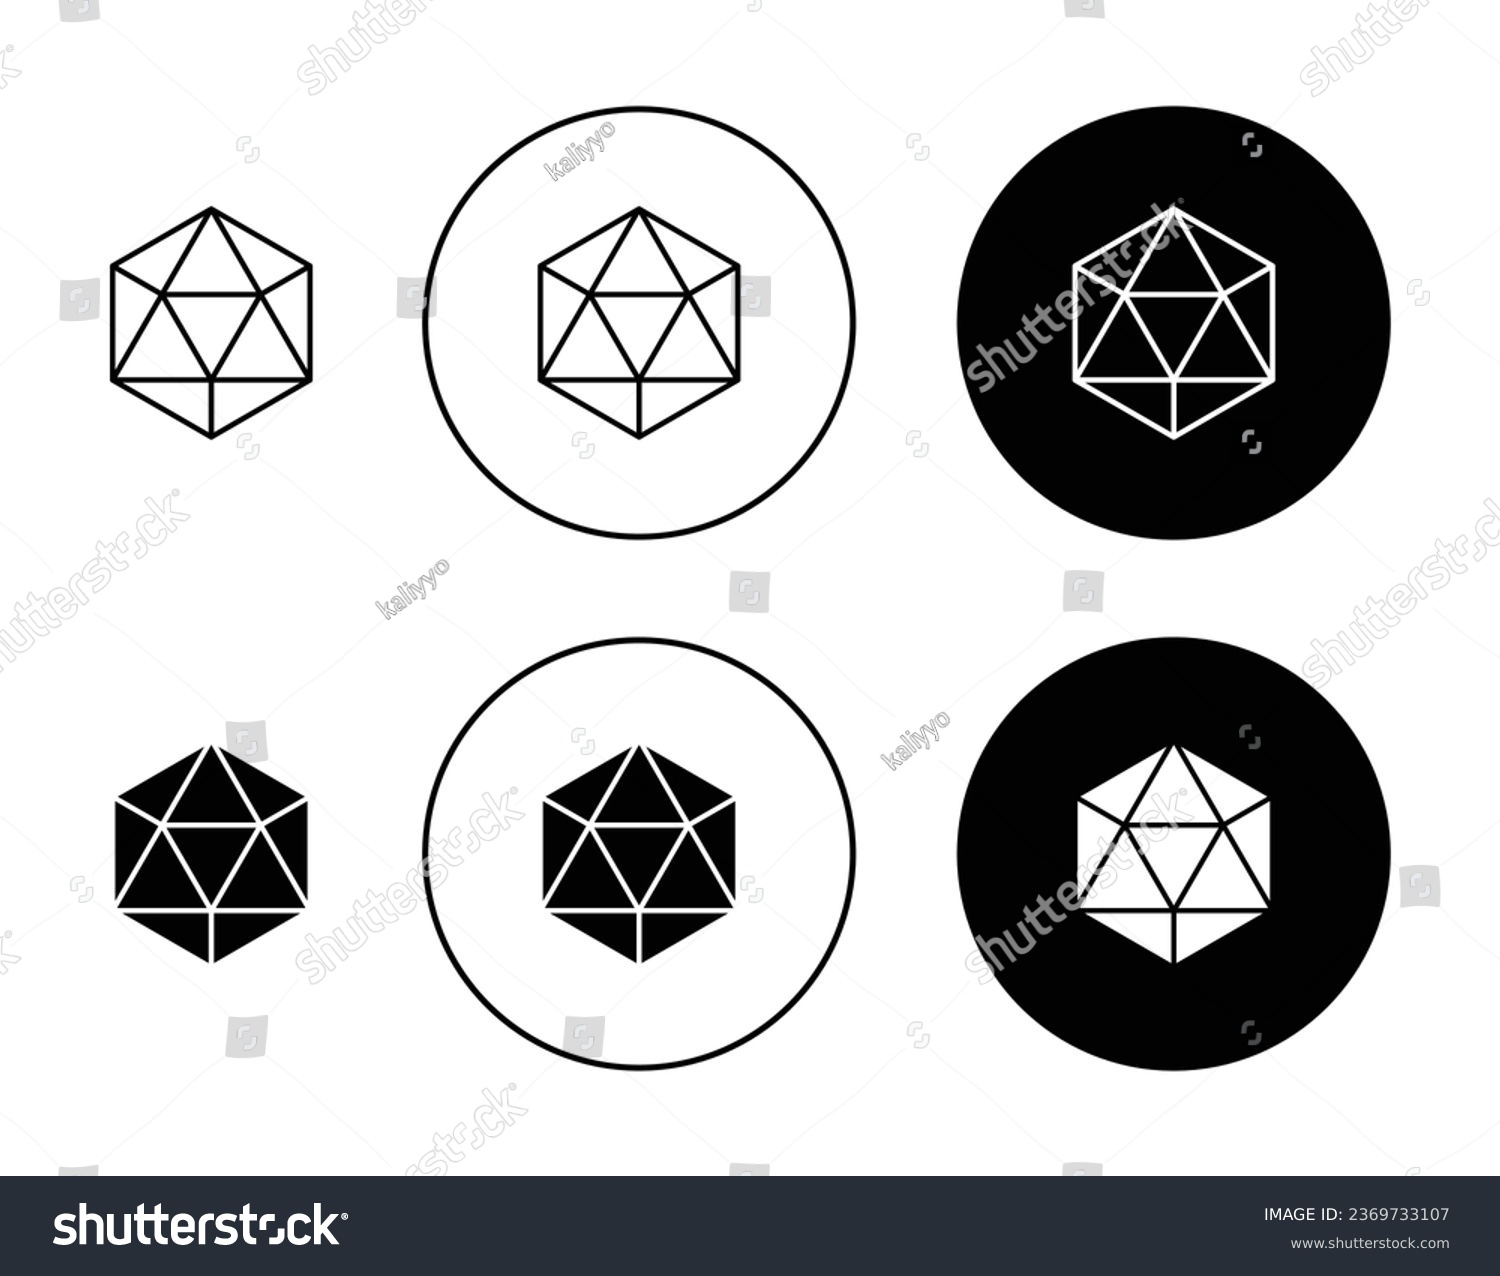 SVG of Icosahedron geometrical figure outline icon set in black filled and outlined style. suitable for UI designs svg